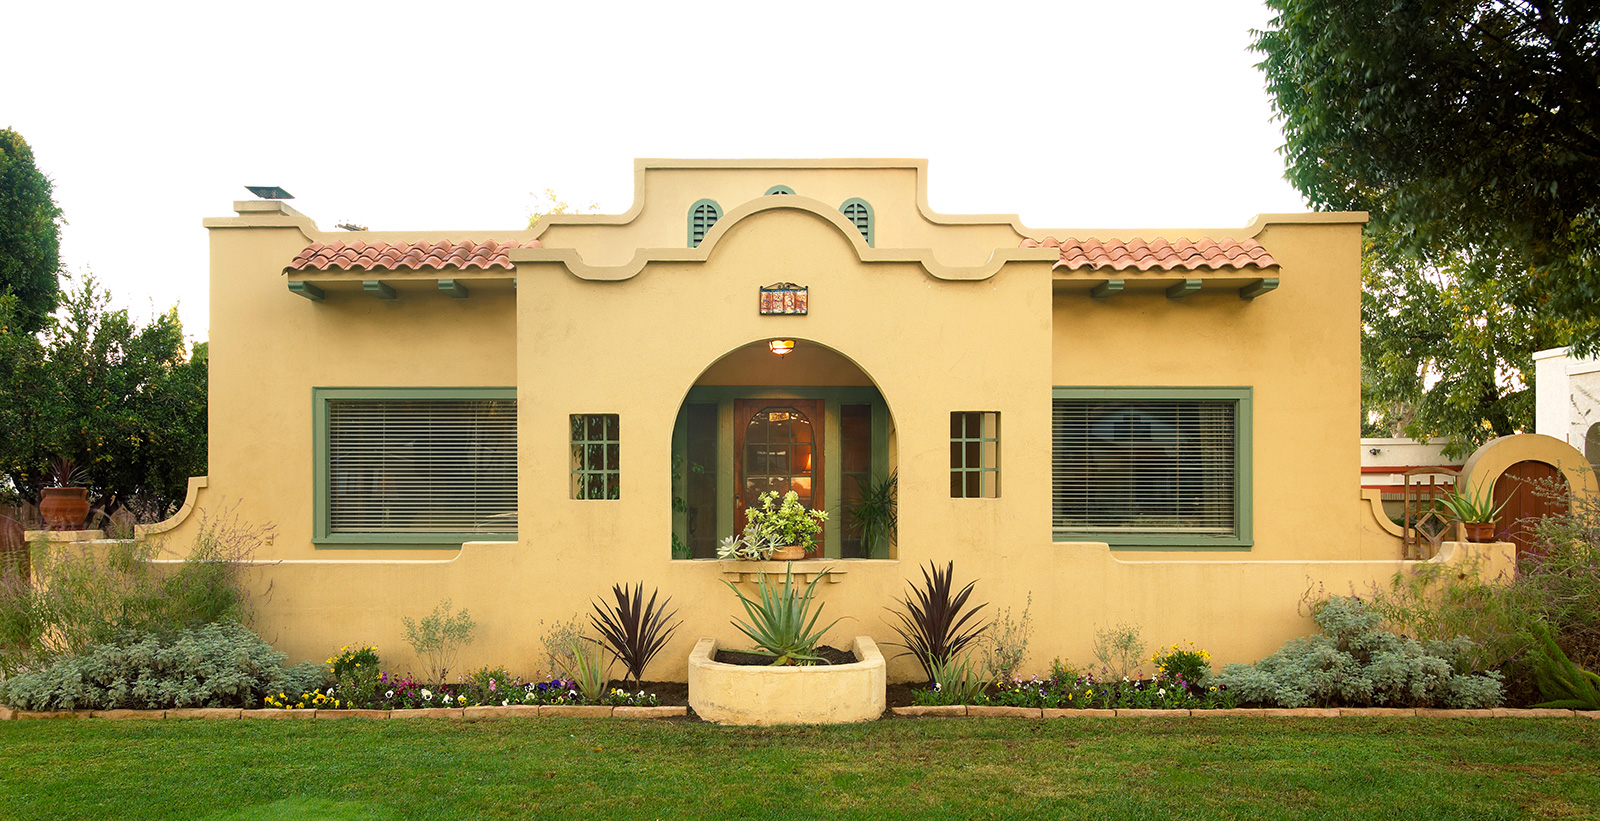 Spanish mediterranean themed house with yellow walls, and green trim.